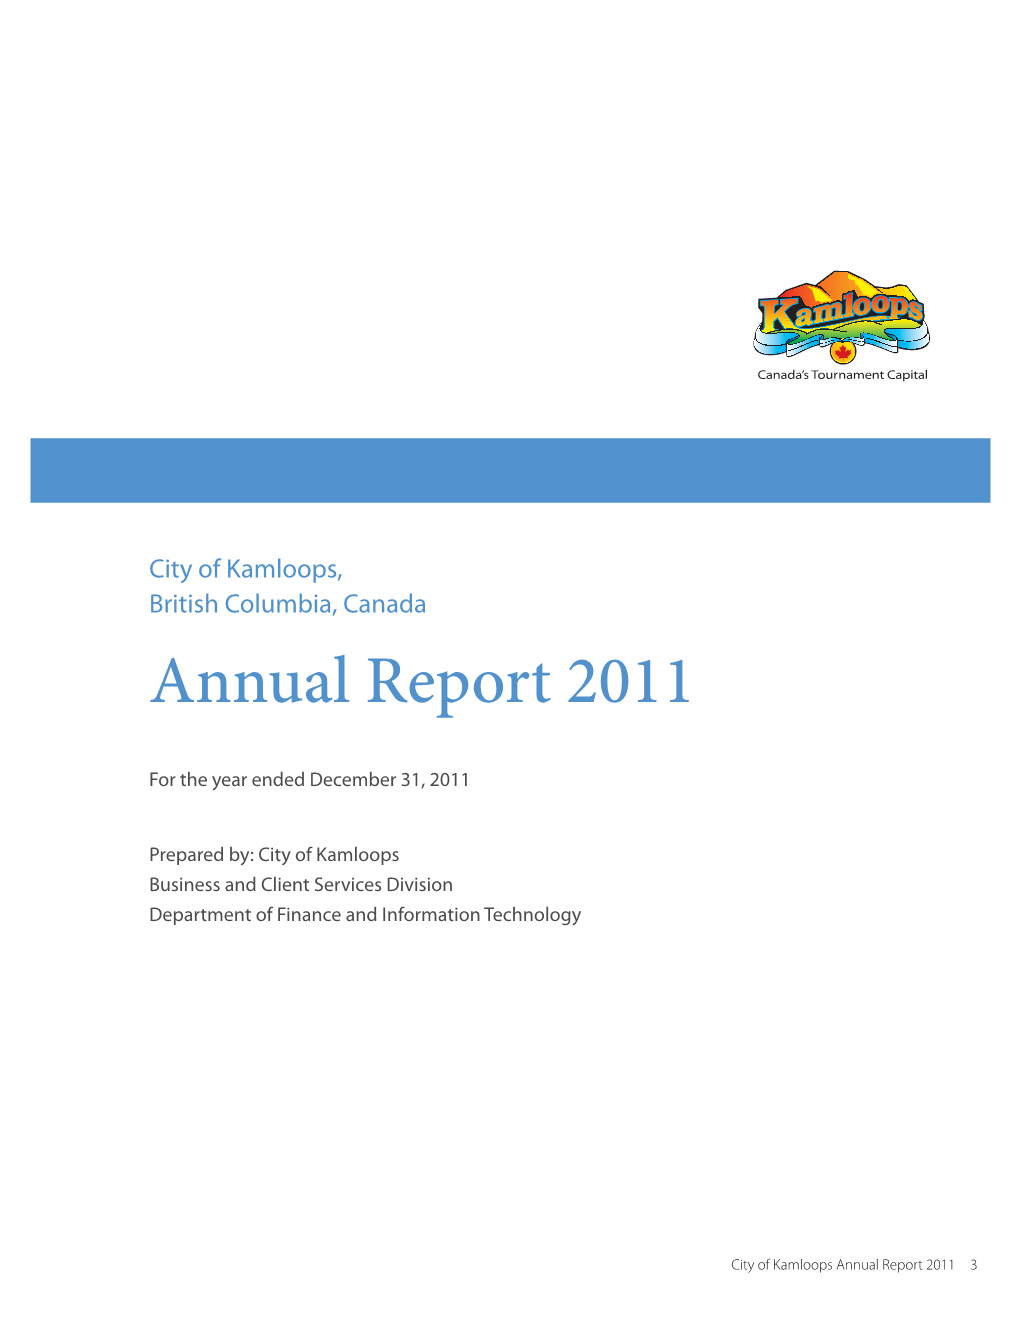 2011 Annual Report for the City of Kamloops (The “City”) for the Year Ended December 31, 2011, in Accordance with Sections 98 and 167 of the Community Charter